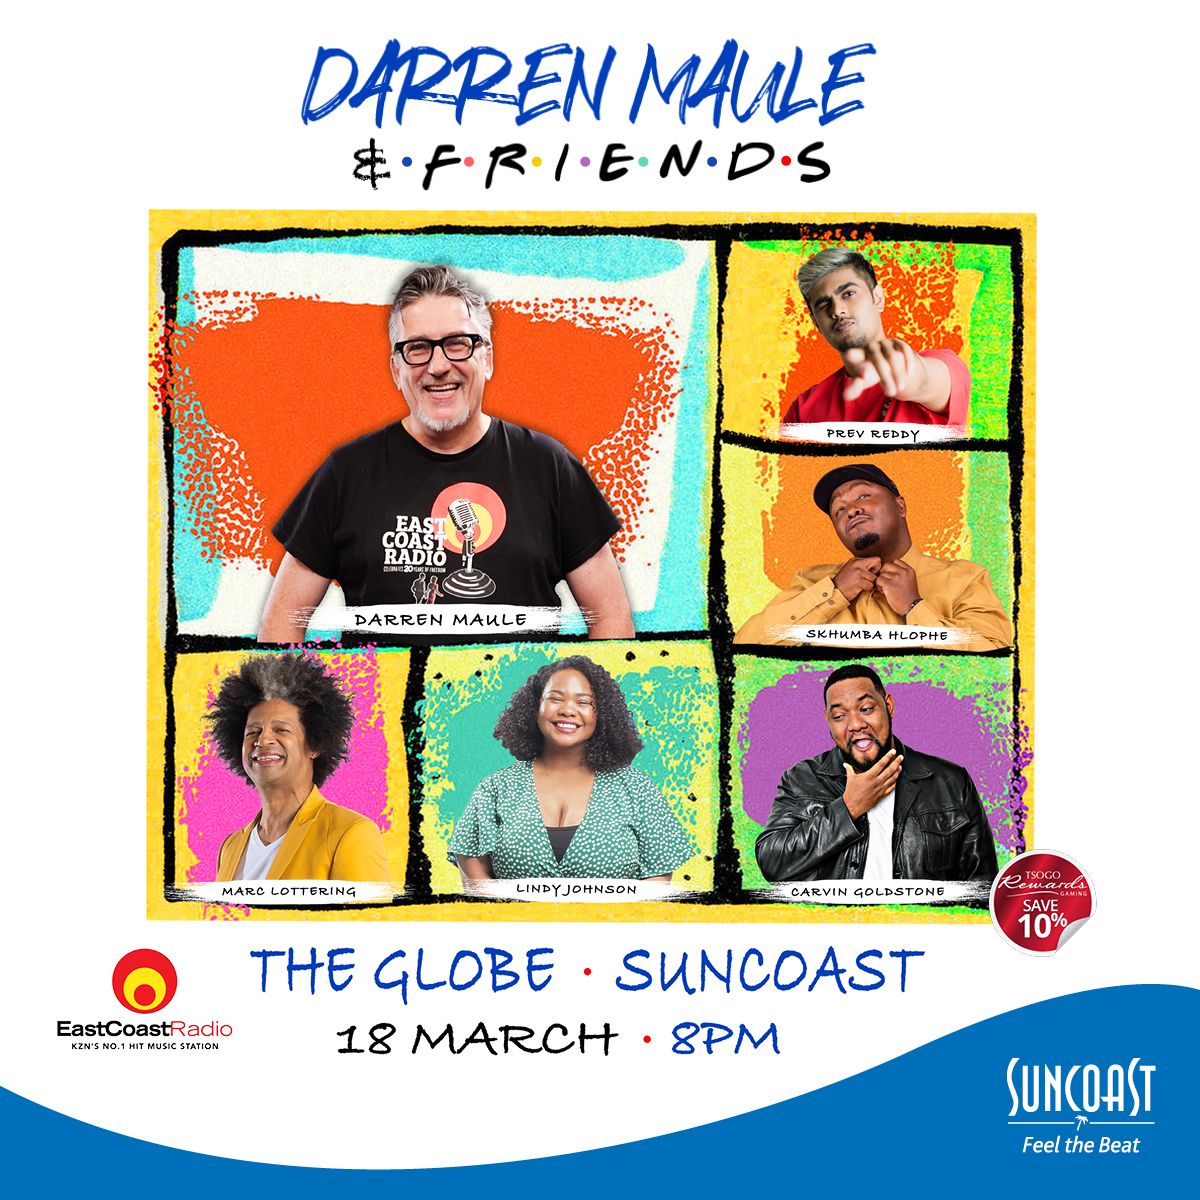 Comedy at its best with Darren Maule & Friends live at Suncoast on 18 March, will have you laughing all the way home. 😄🎟 Tickets available on Ticketpro bitly.ws/zZeH
#suncoastcasino #darrenmauleandfriends #marchevents #laughtertherapy